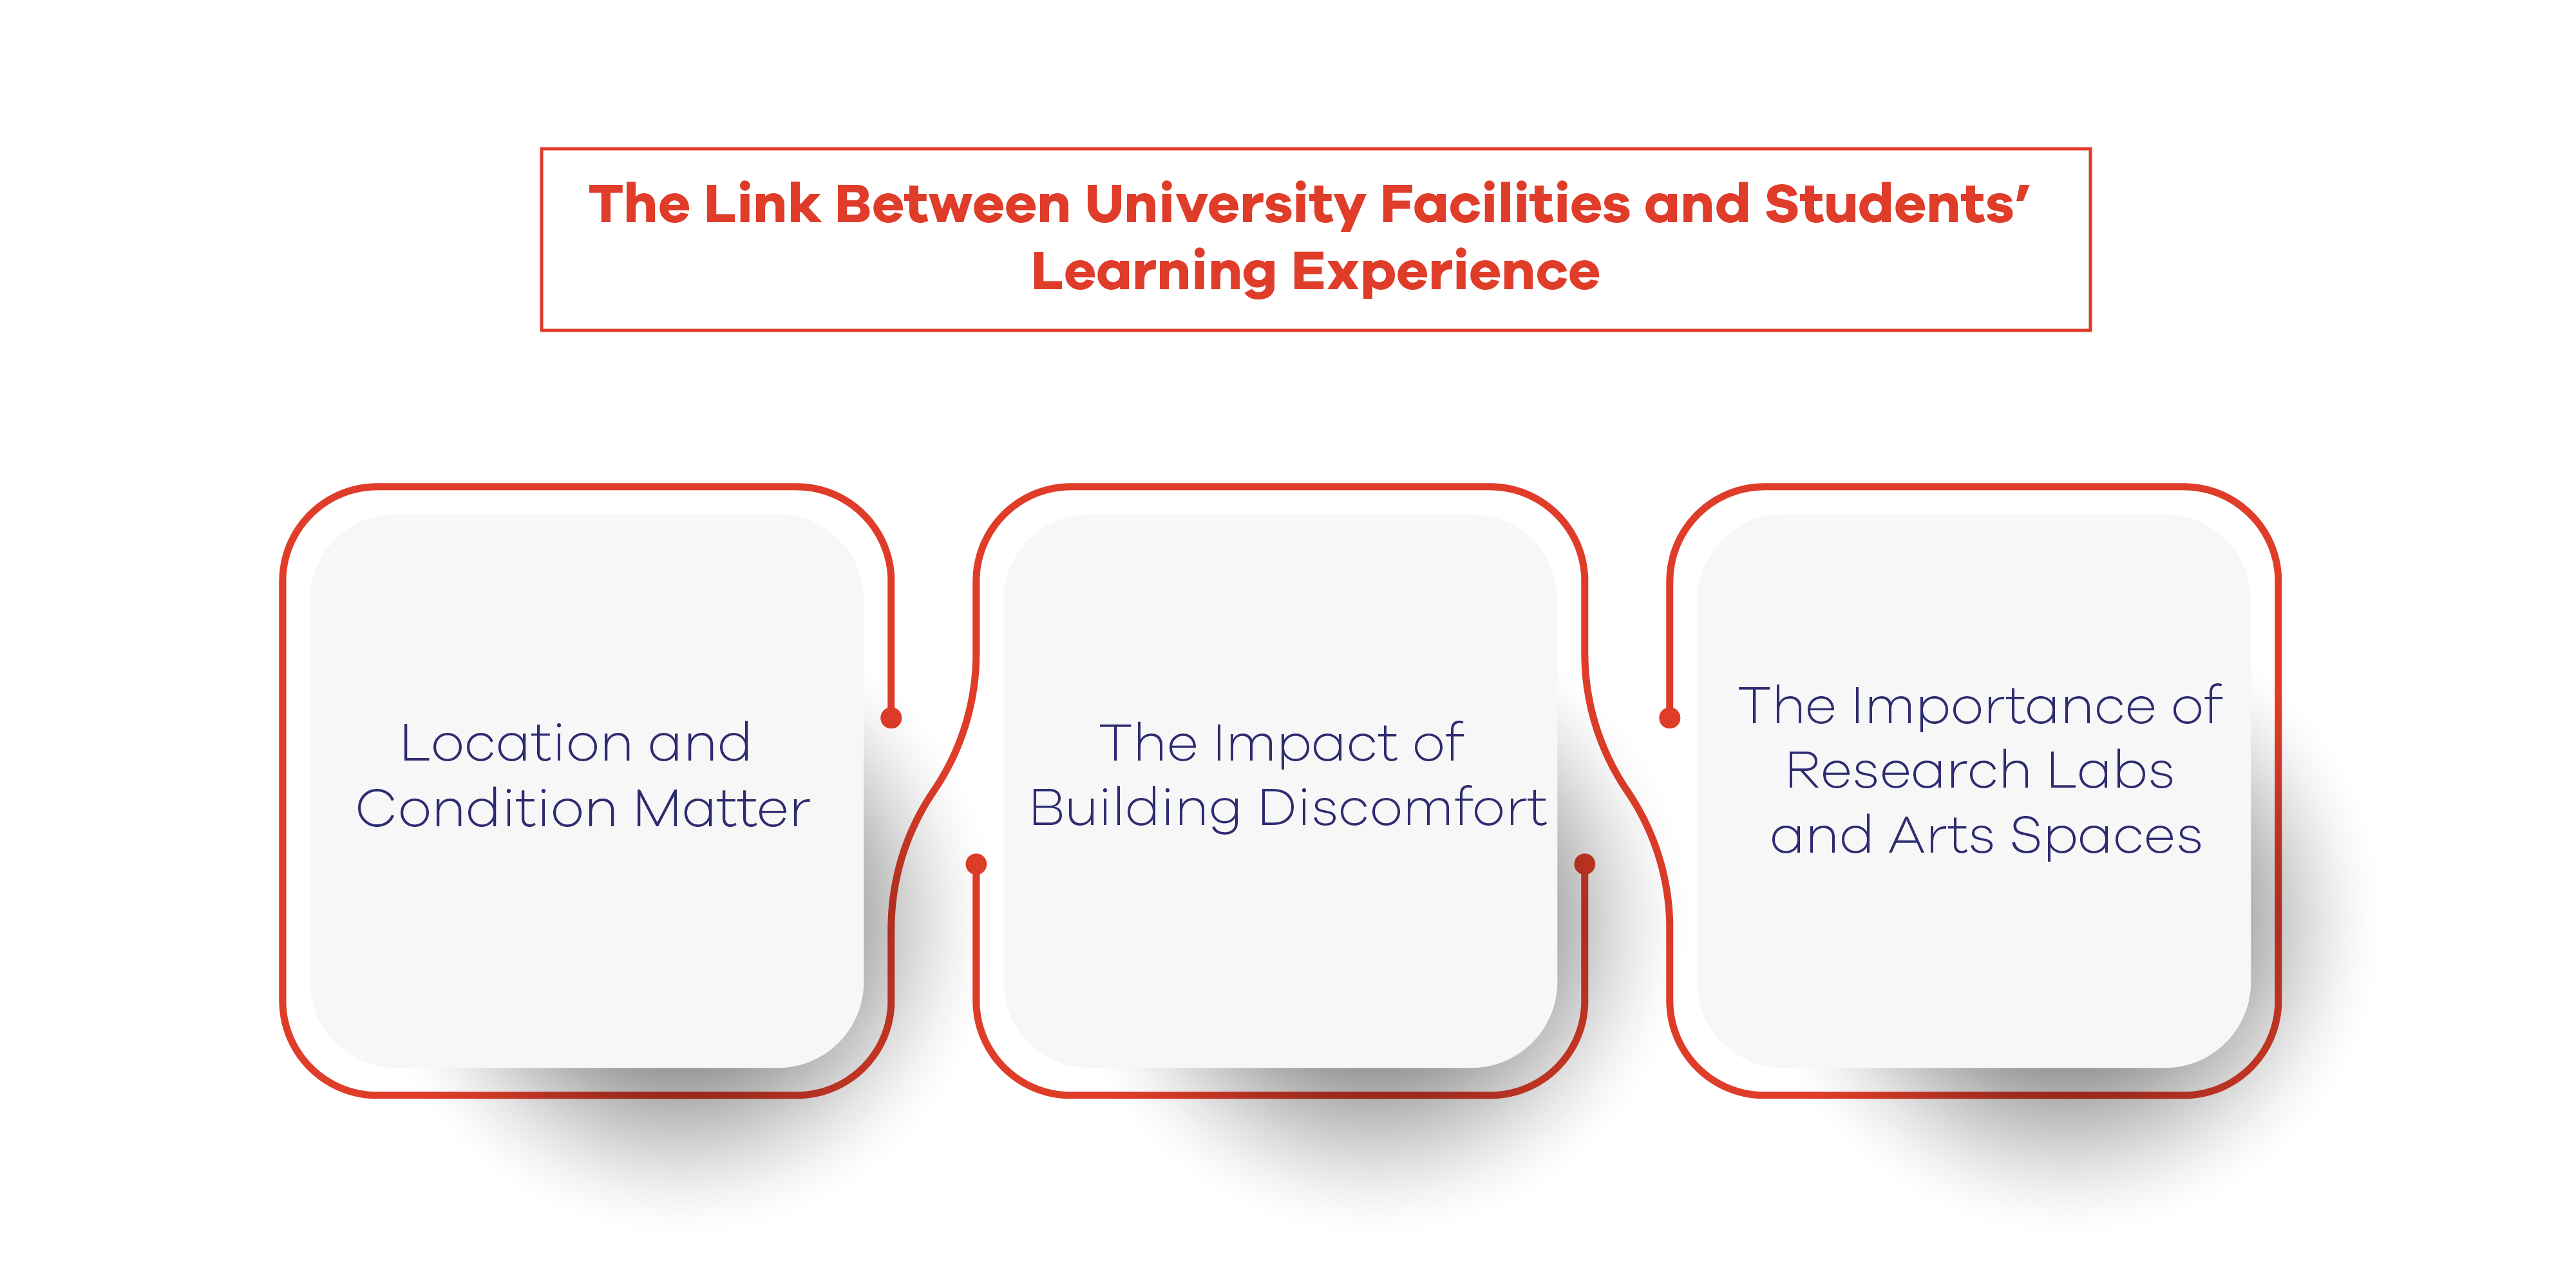 The Link Between University Facilities and Students’ Learning Experience 